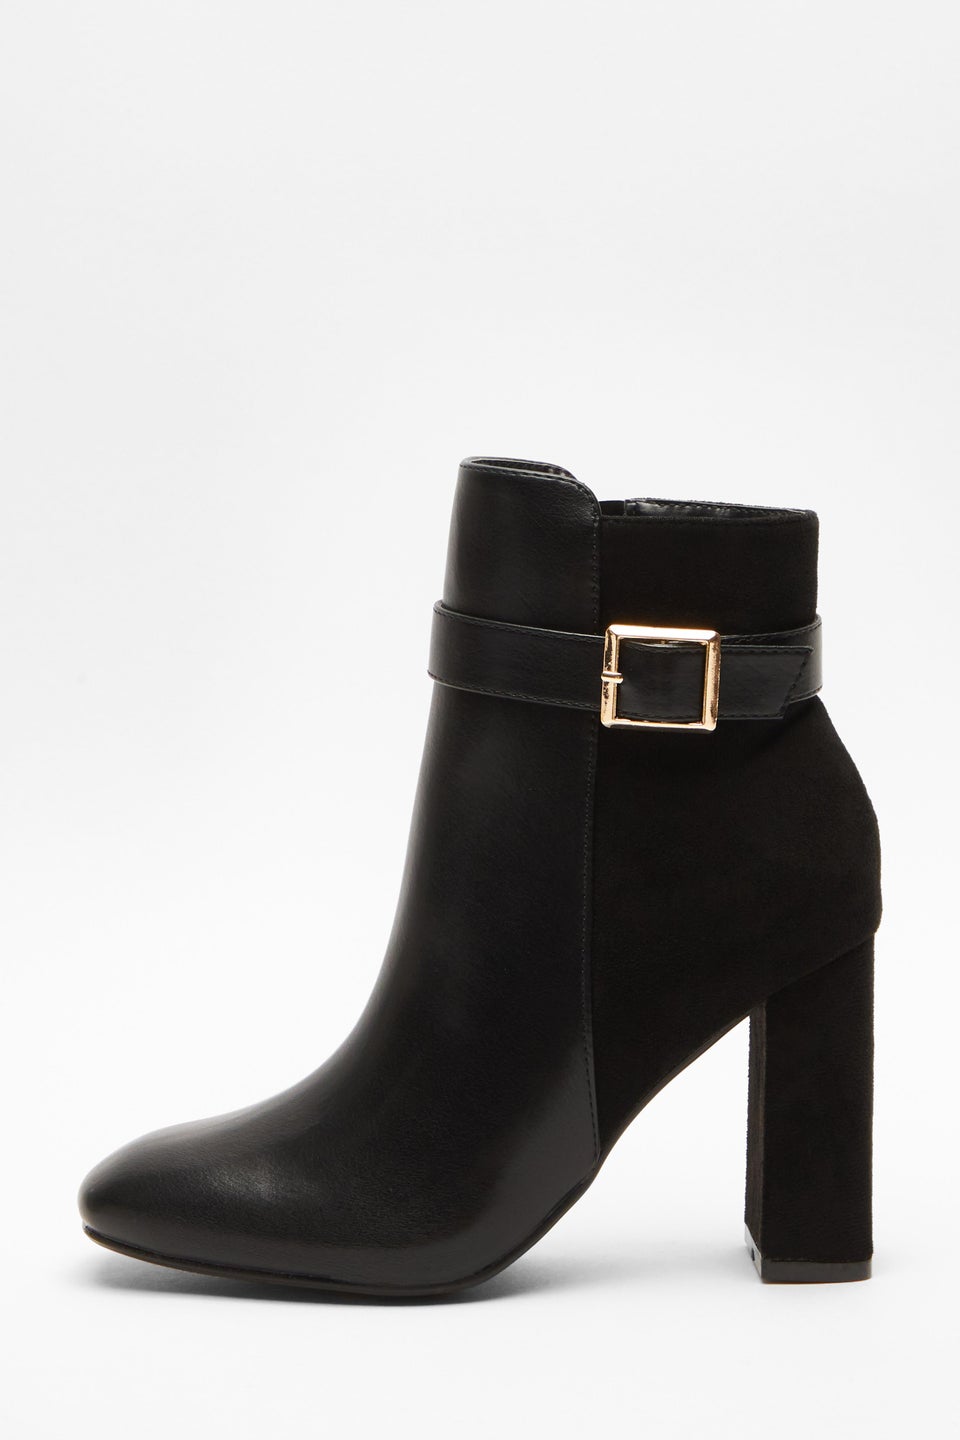 Quiz Black Faux Leather Heeled Ankle Boots - Matalan